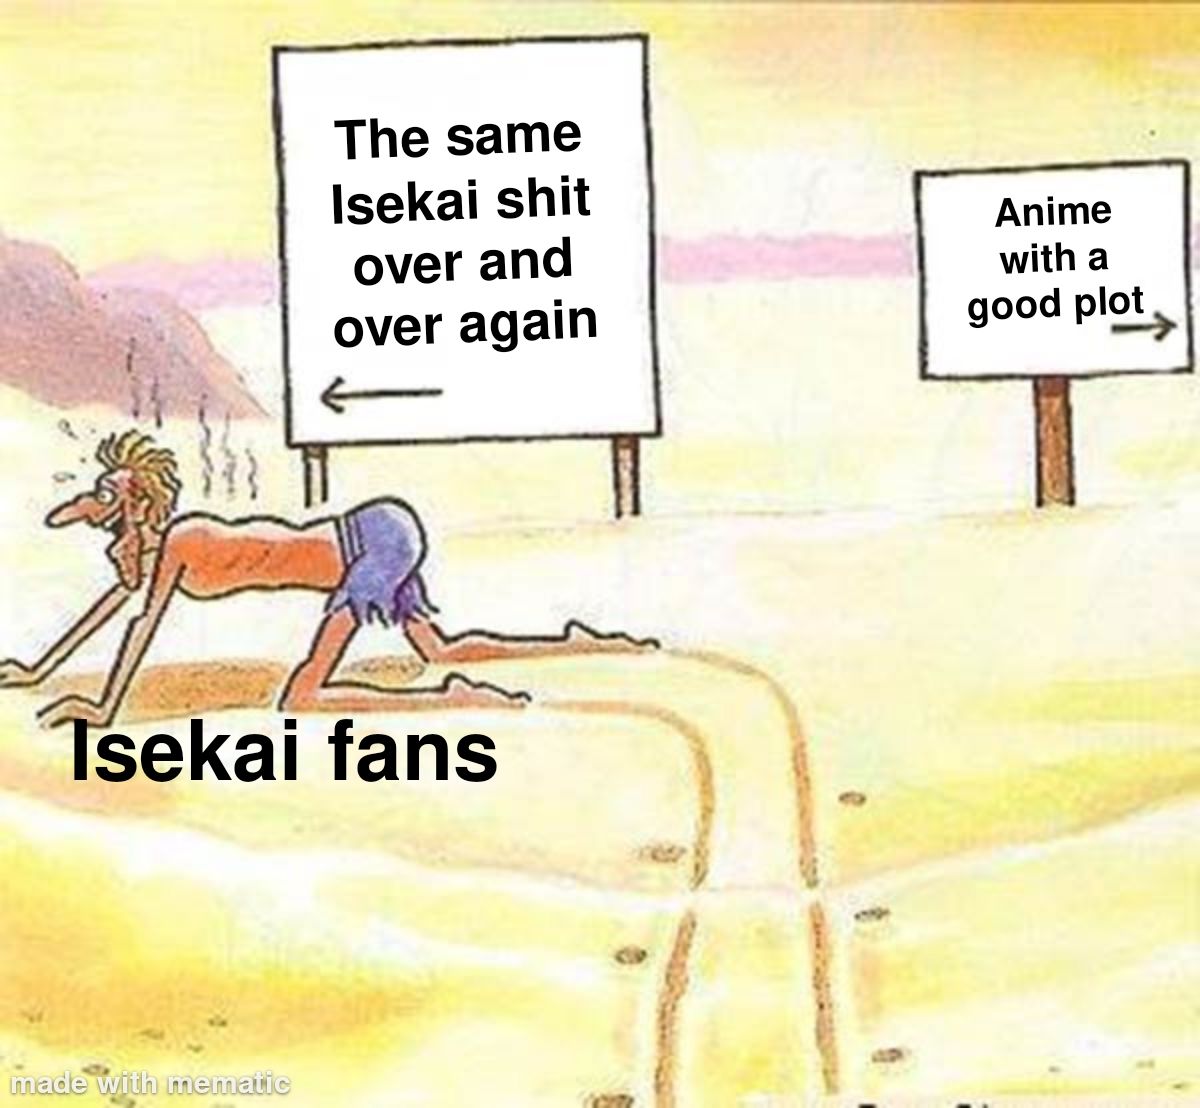 Ofcourse not every Isekai is bad